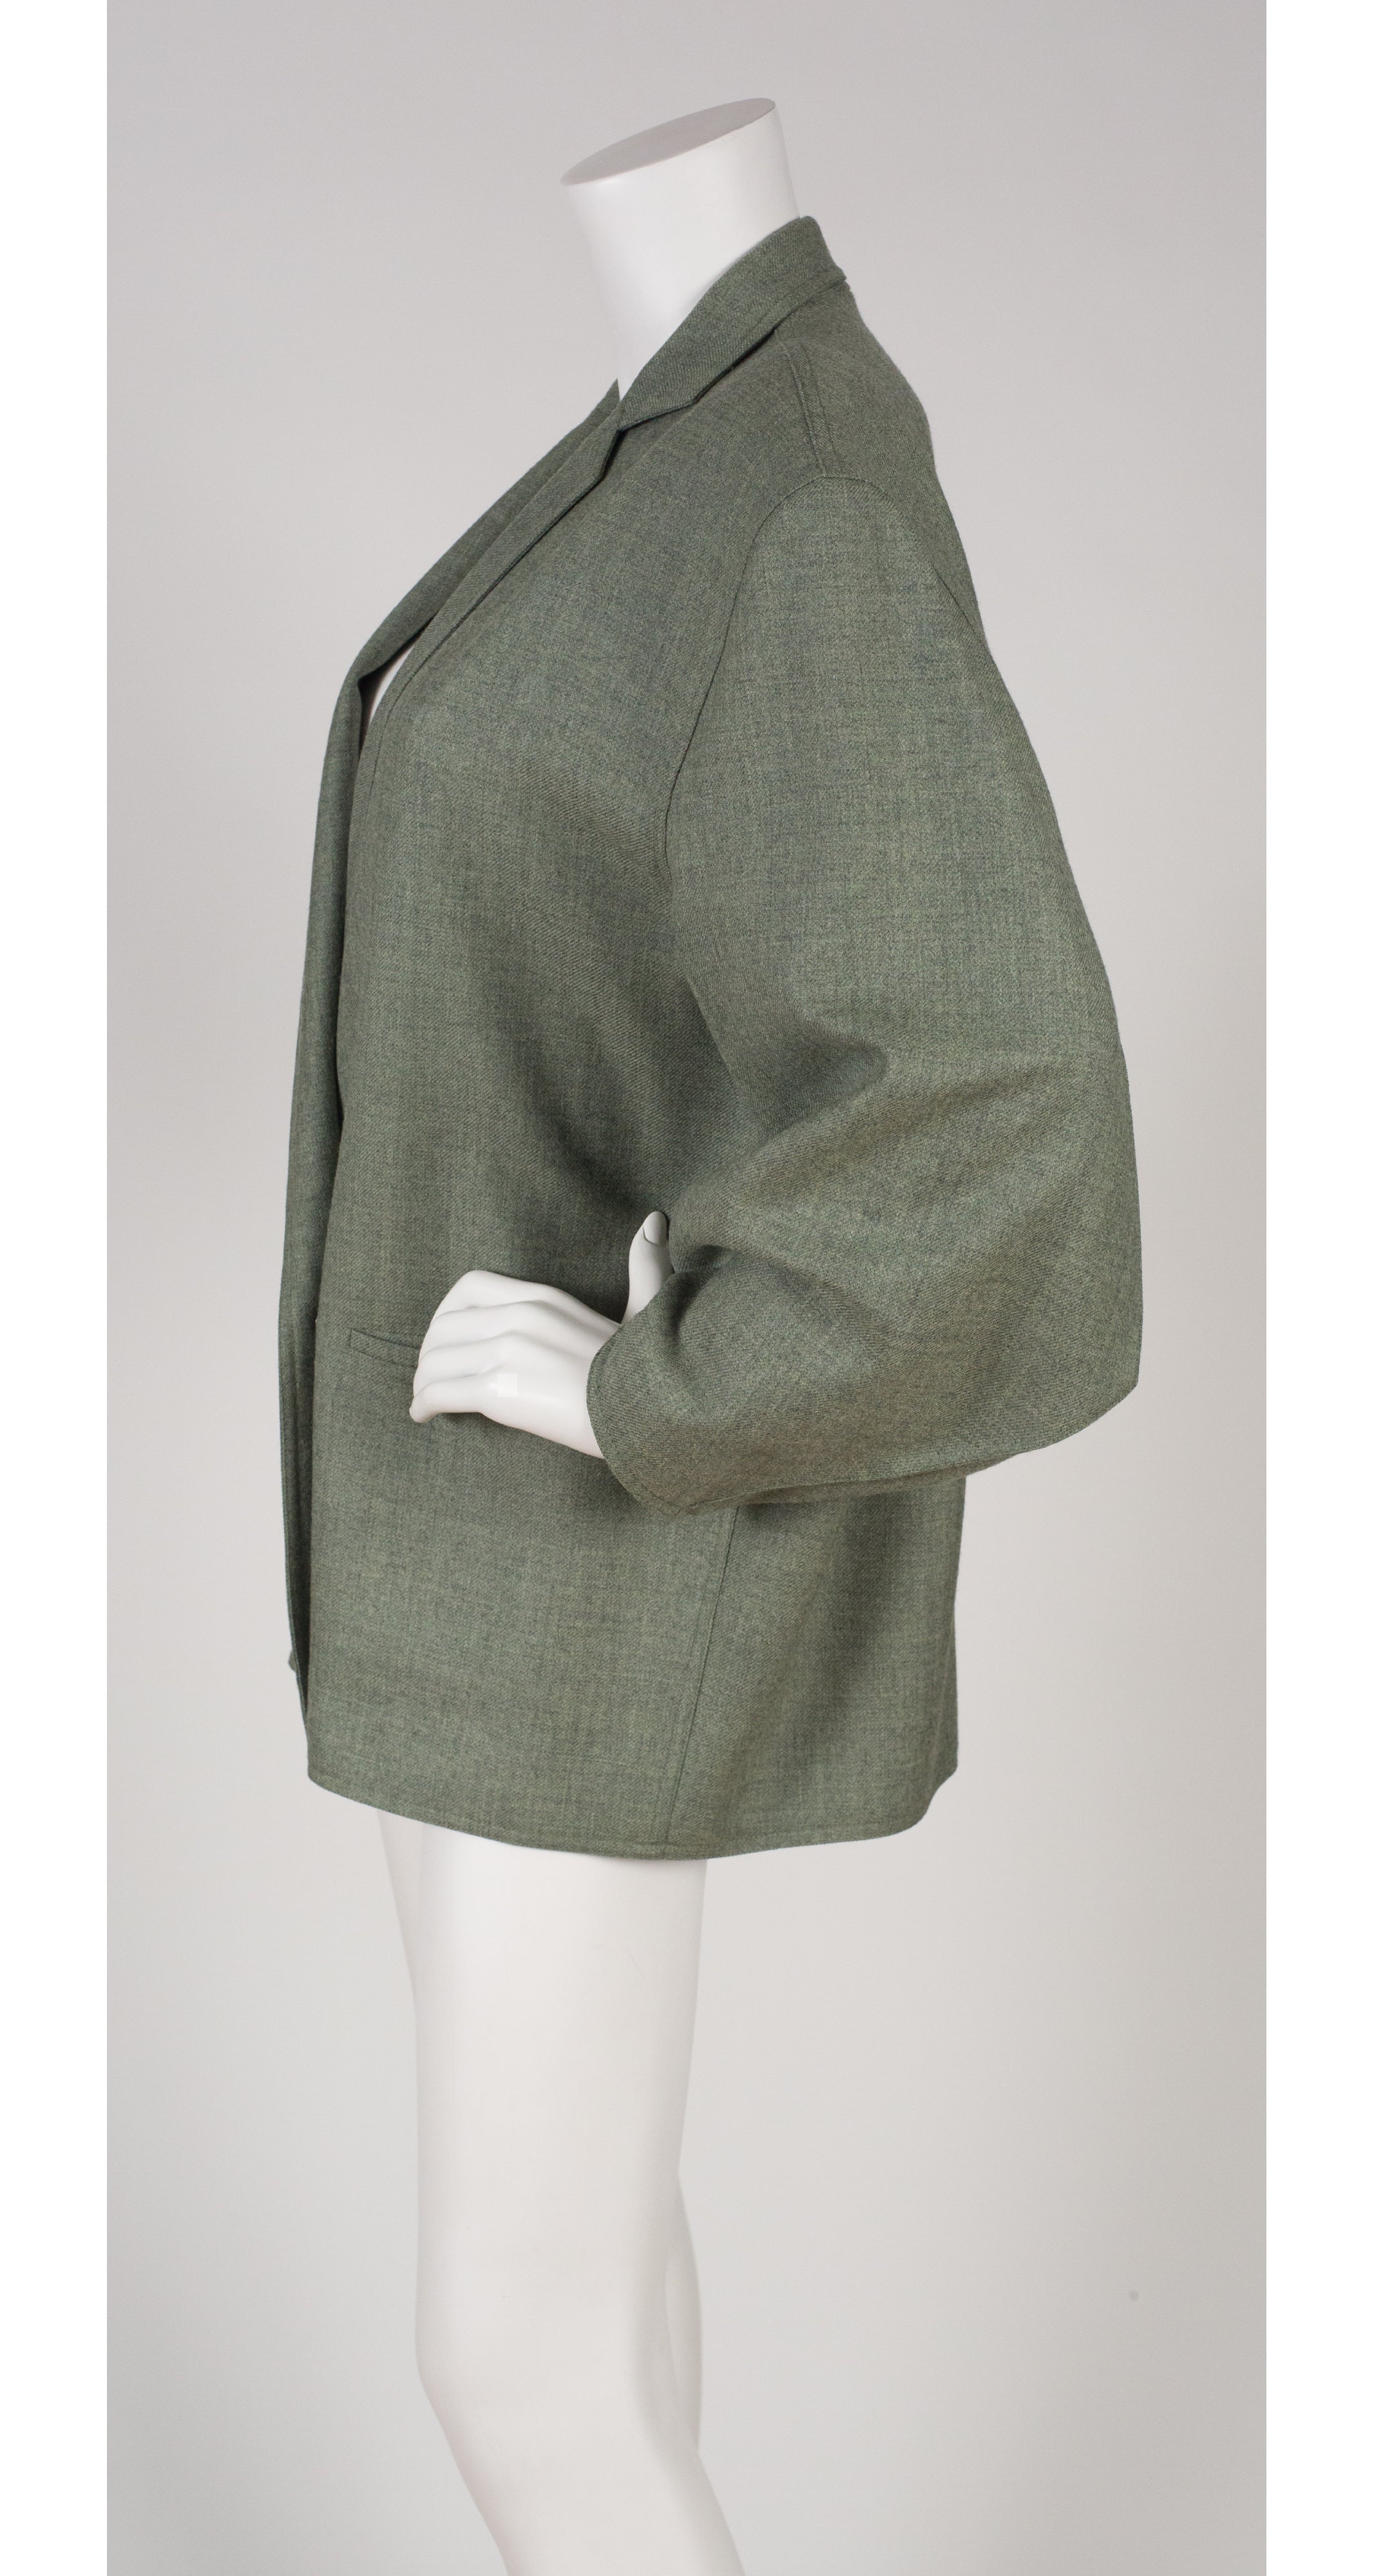 1980s Sage Green Wool Double-Breasted Blazer